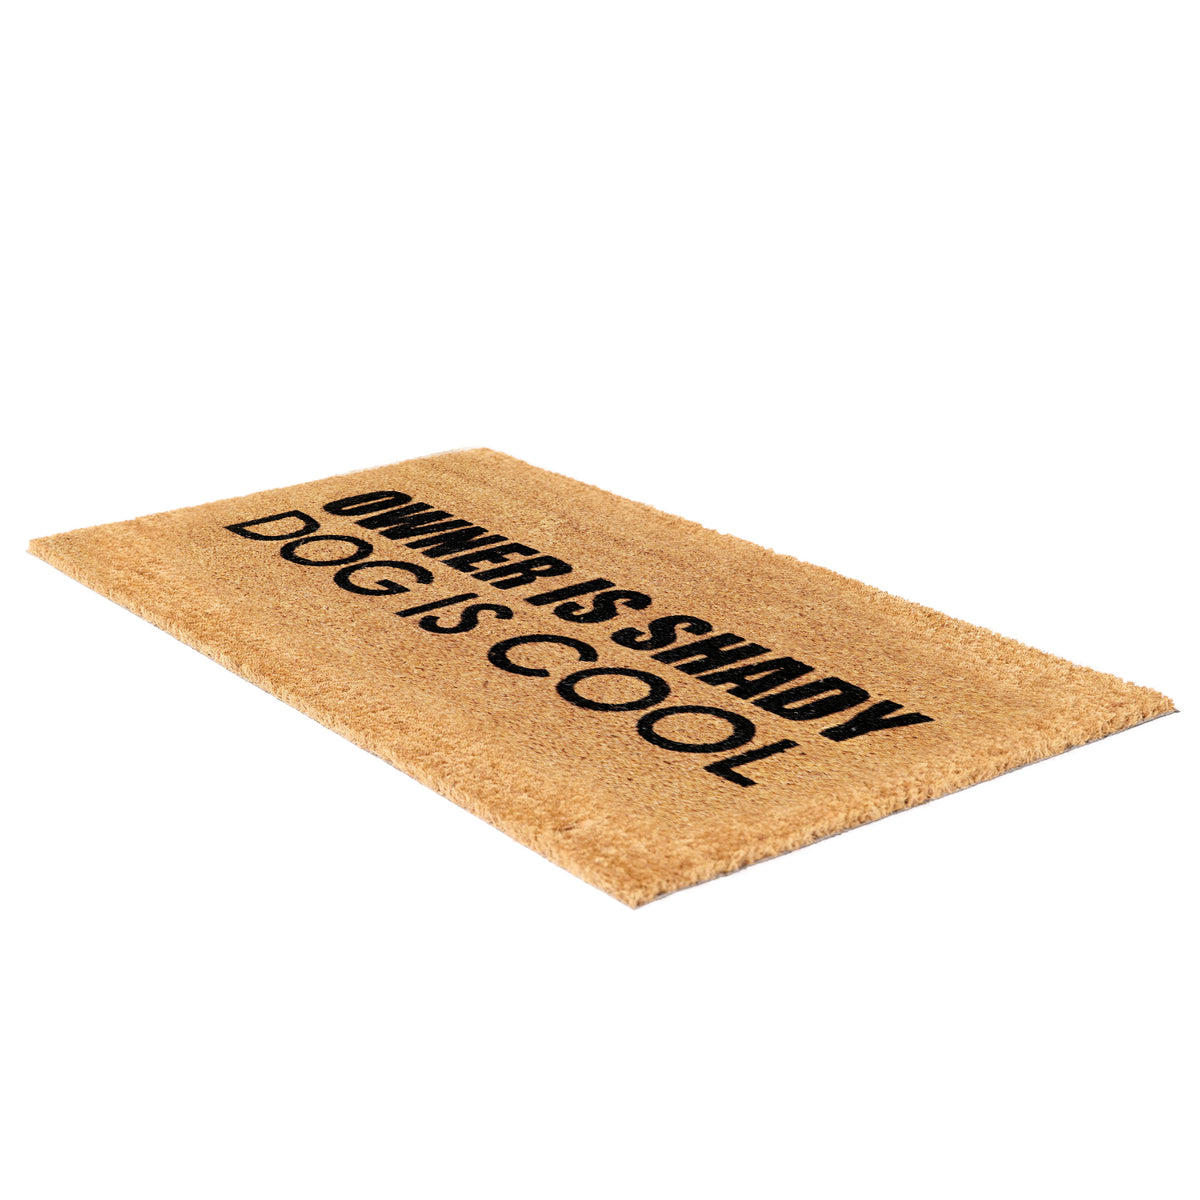 Funny "Owner is Shady, Dog is Cool" Printed Natural Coir Floor Mat - OnlyMat